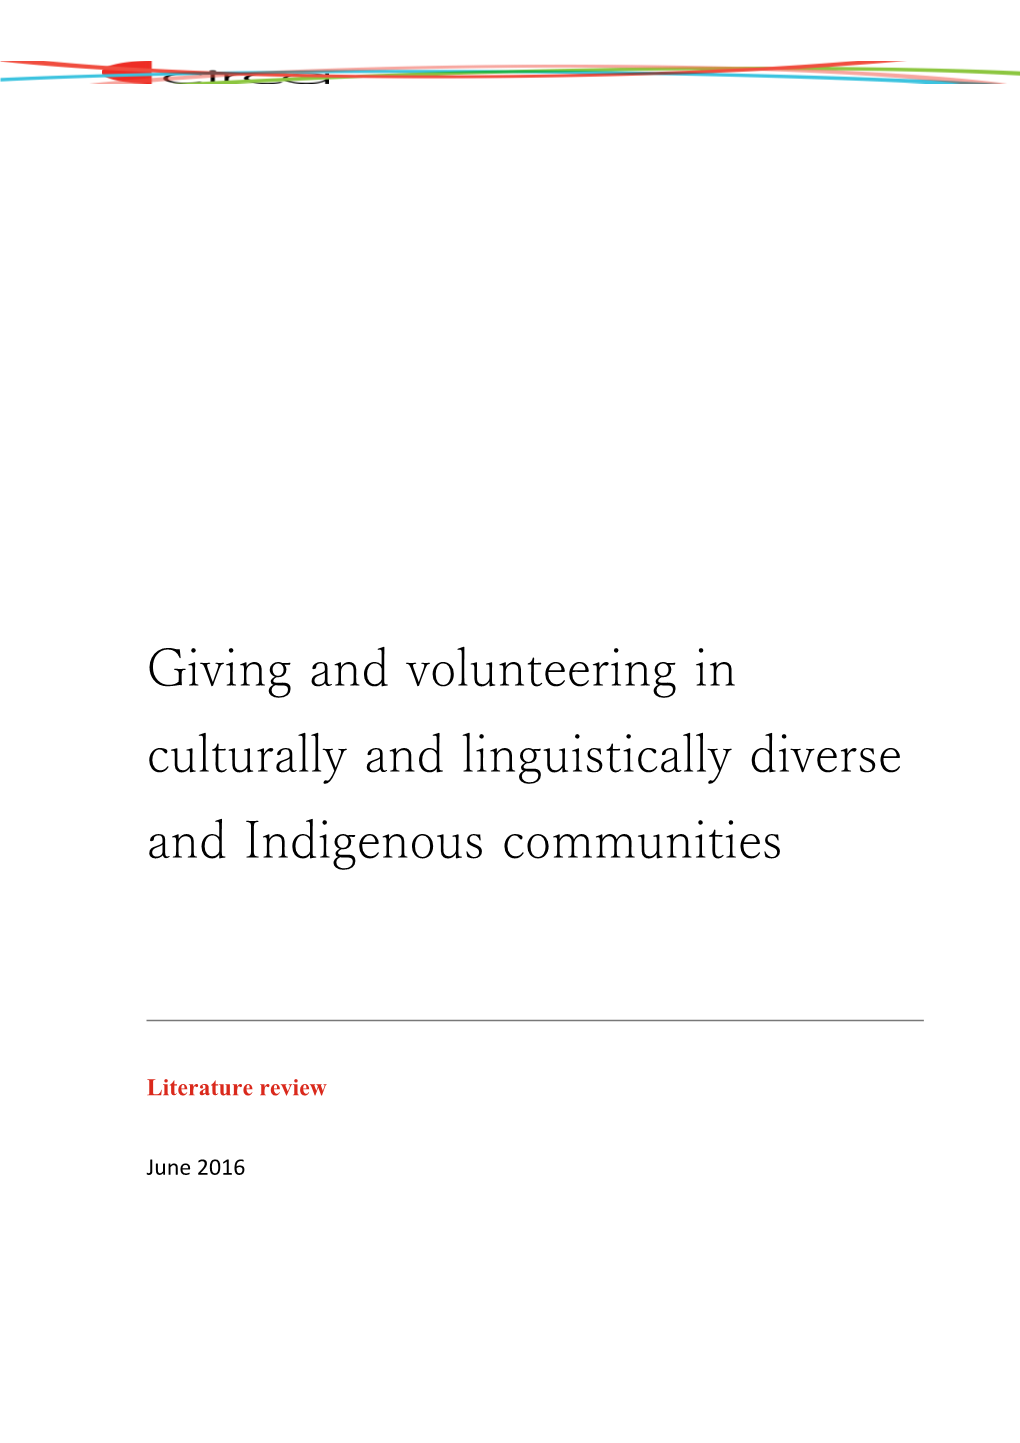 Literature Review - Giving and Volunteering in CALD and Indigenous Communities